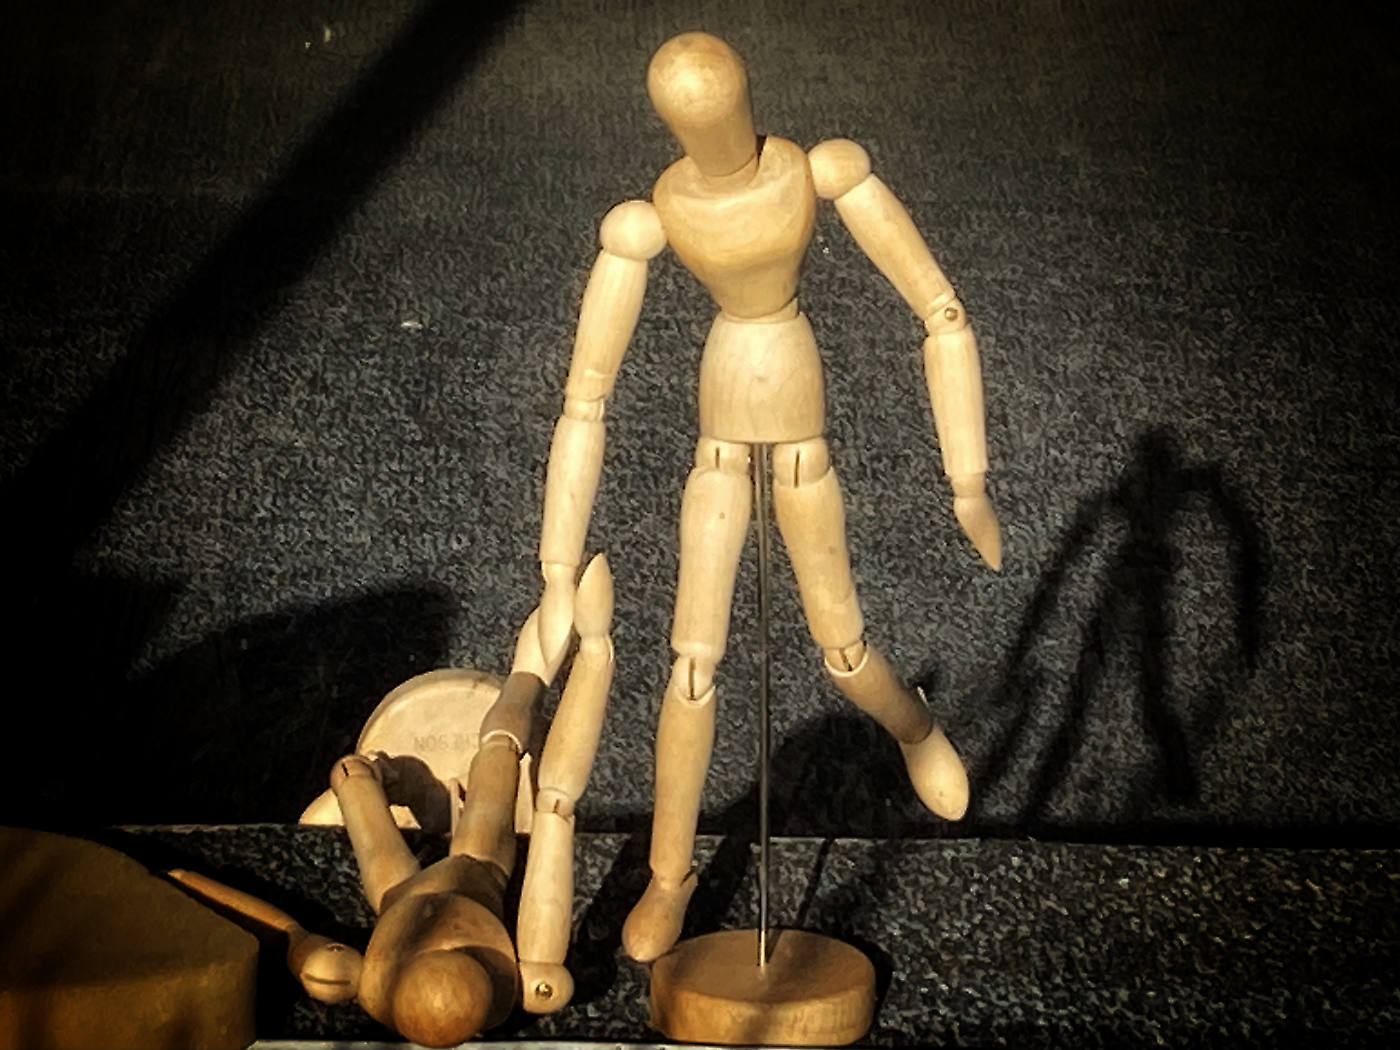 pair of wooden body models, one appearing to pull up the other